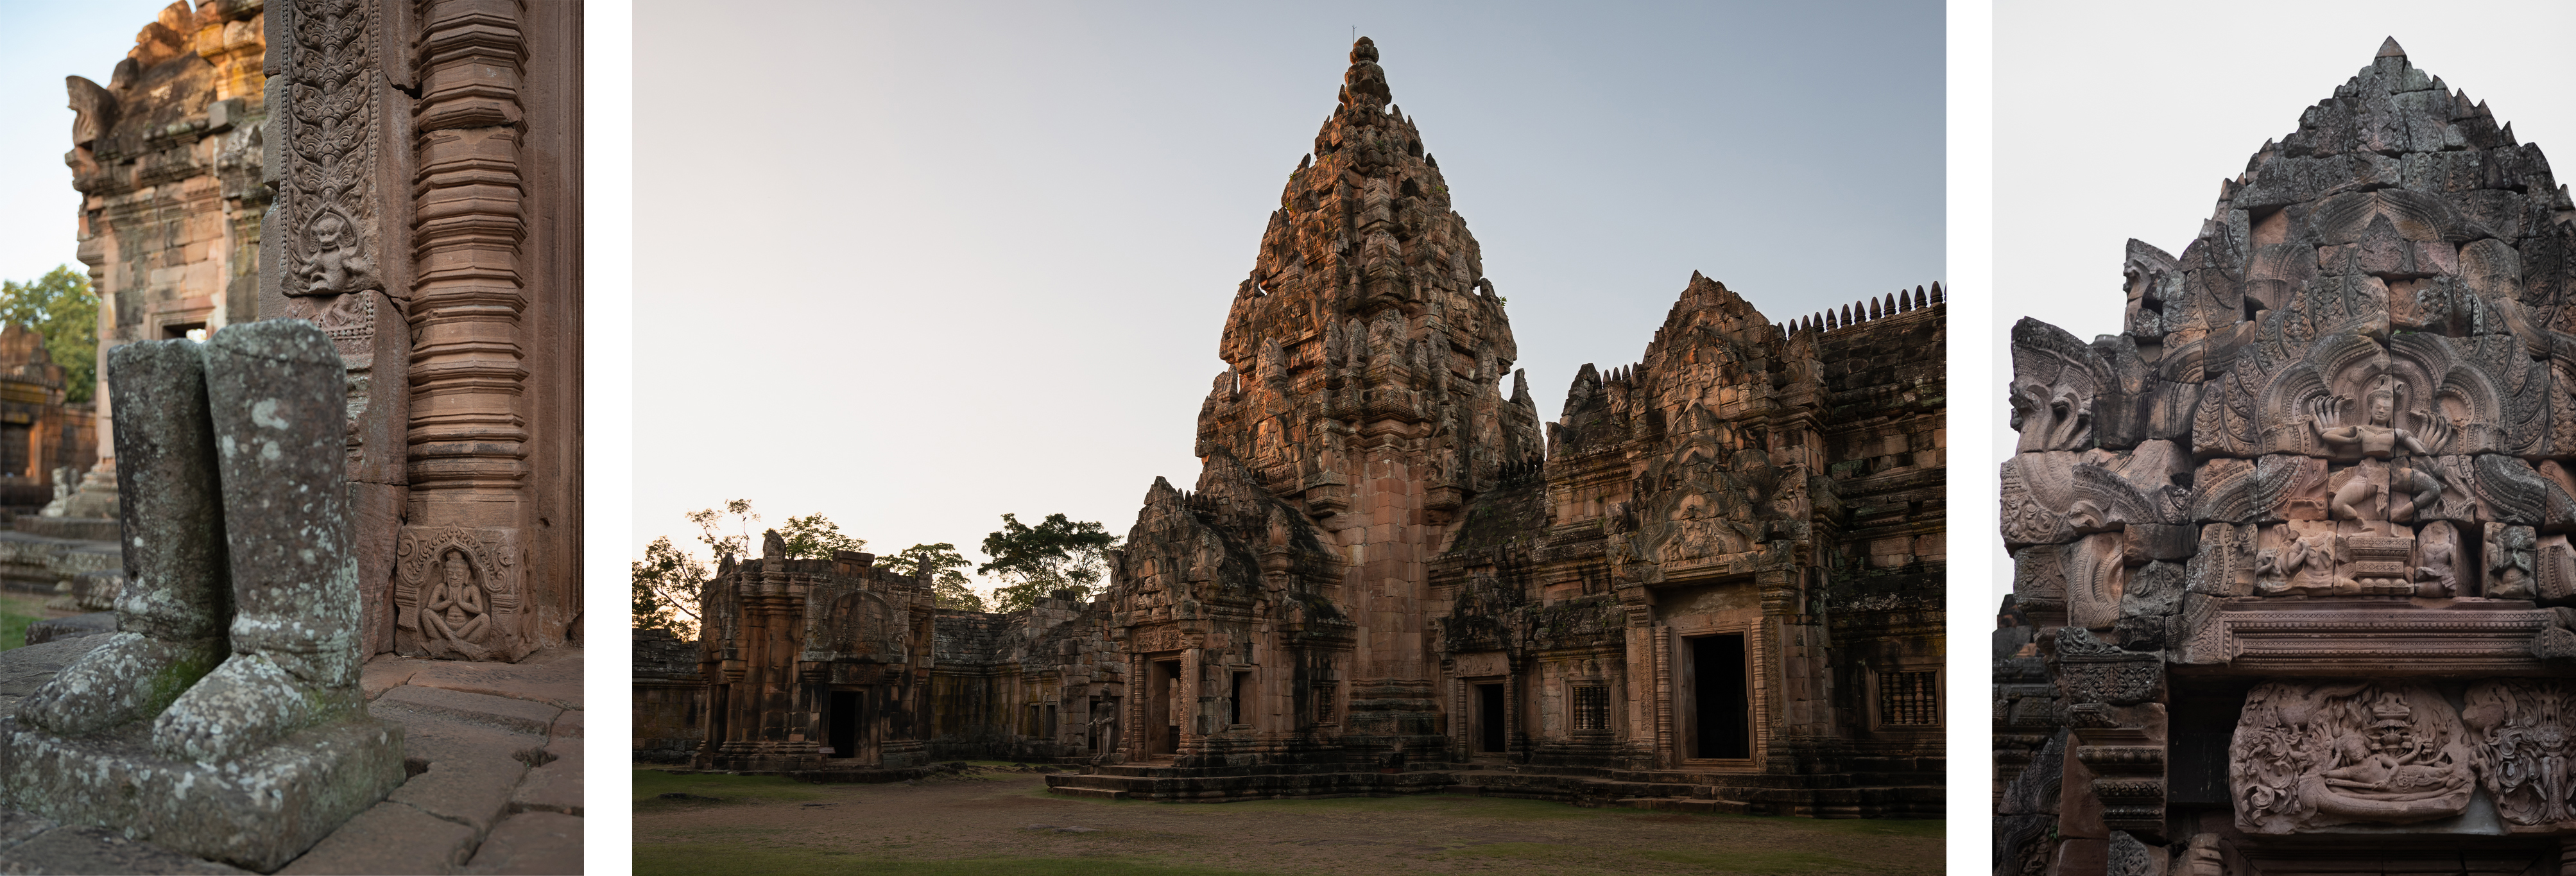 LEFT: The pedestal and feet of a statue remain at Phanom Rung temple in northeast Thailand, pictured on Nov. 4, 2022. Restoration work has been done on the site, though many artifacts originally located there are now in museums outside Thailand. CENTER: The sun sets over the Phanom Rung temple, which is located near Plai Bat II temple in Buriram Province, Thailand. RIGHT: Elaborate stonework can be seen at The pedestal and feet of a statue remain at Phanom Rung temple in northeast Thailand, pictured on Nov. 4, 2022. (Photos by Athikhom Saengchai/Special to The Denver Post)